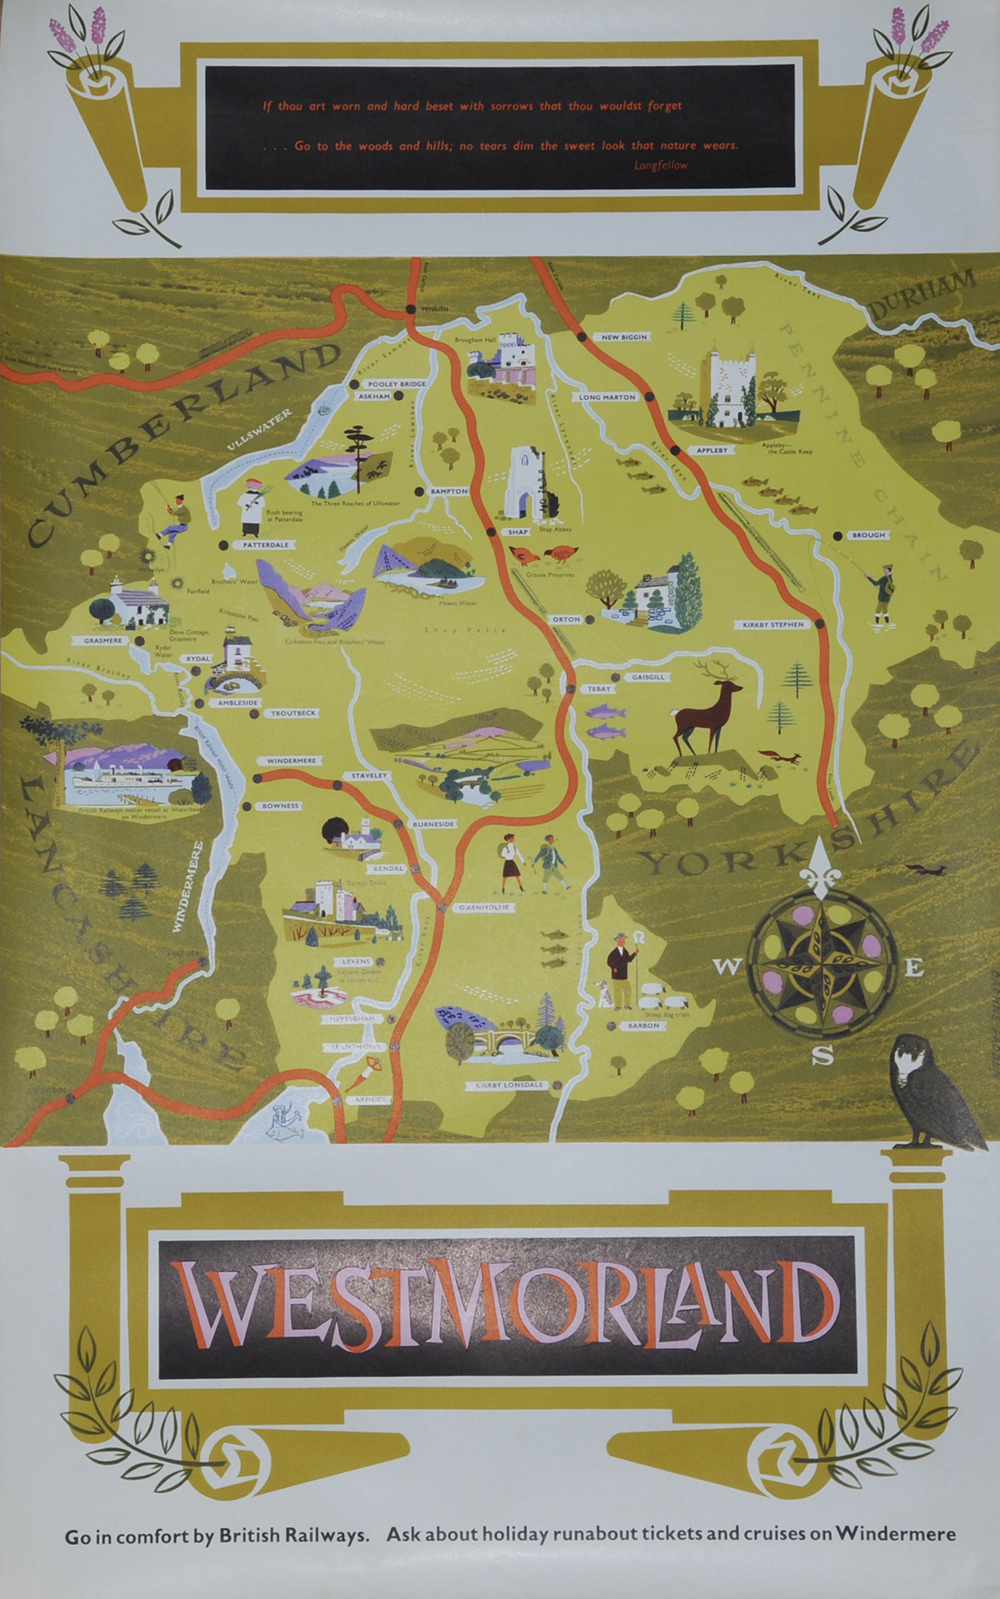 Poster British Railways 'Westmorland' by Daphne Padden, double royal size 25in x 40in. Depicts map